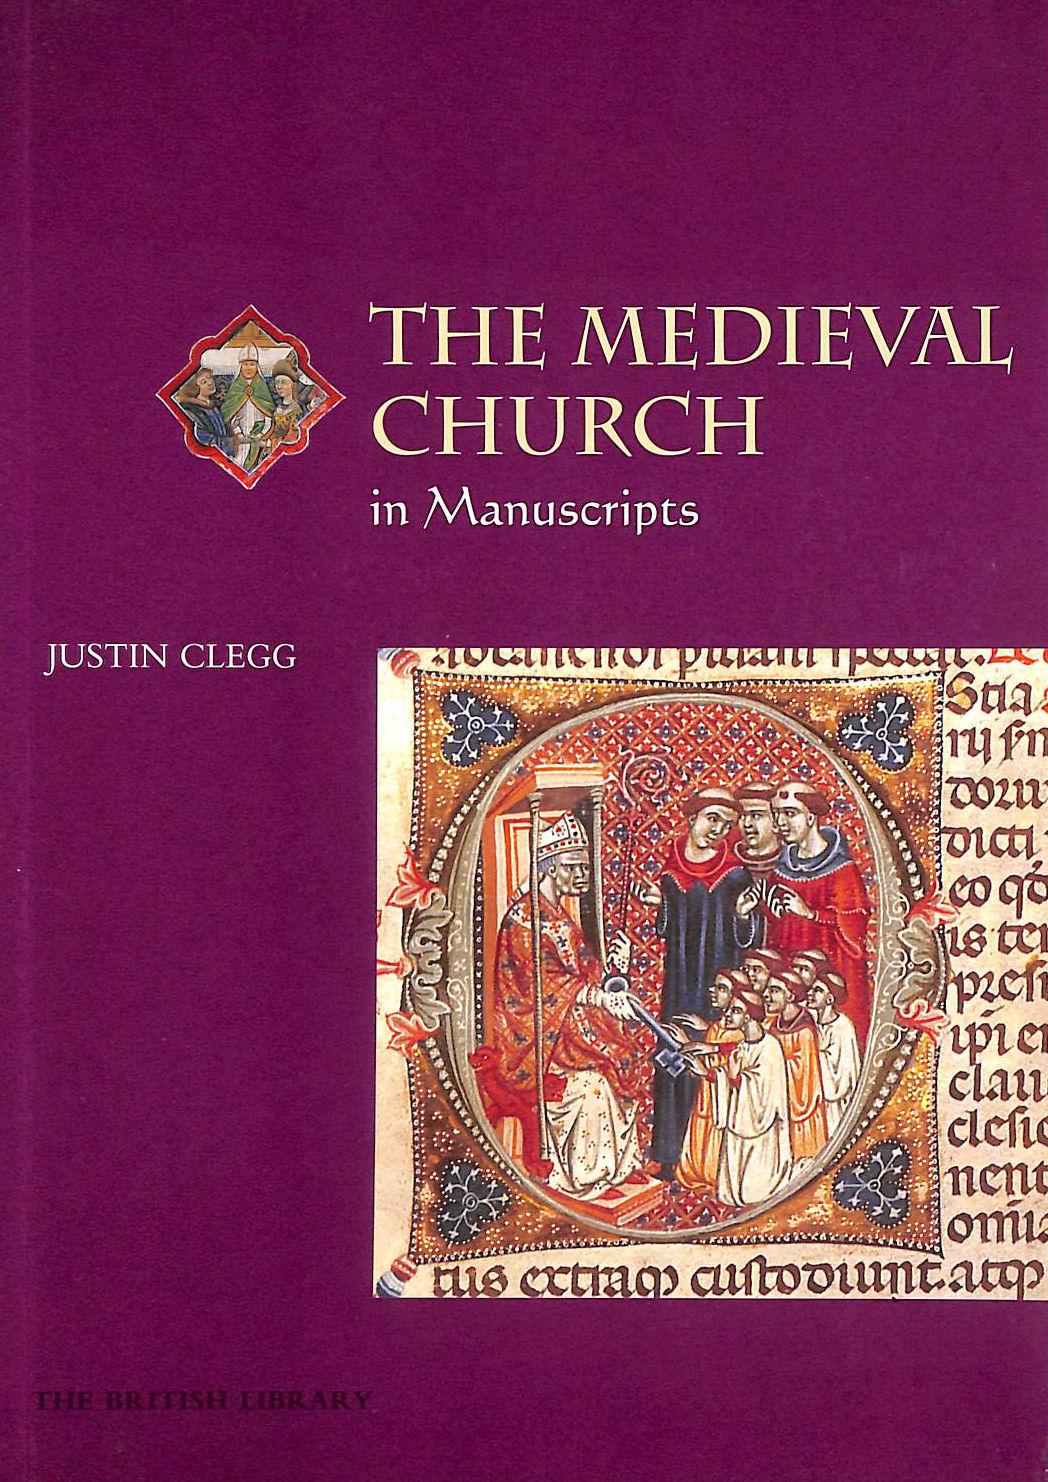 JUSTIN CLEGG - The Medieval Church in Manuscripts